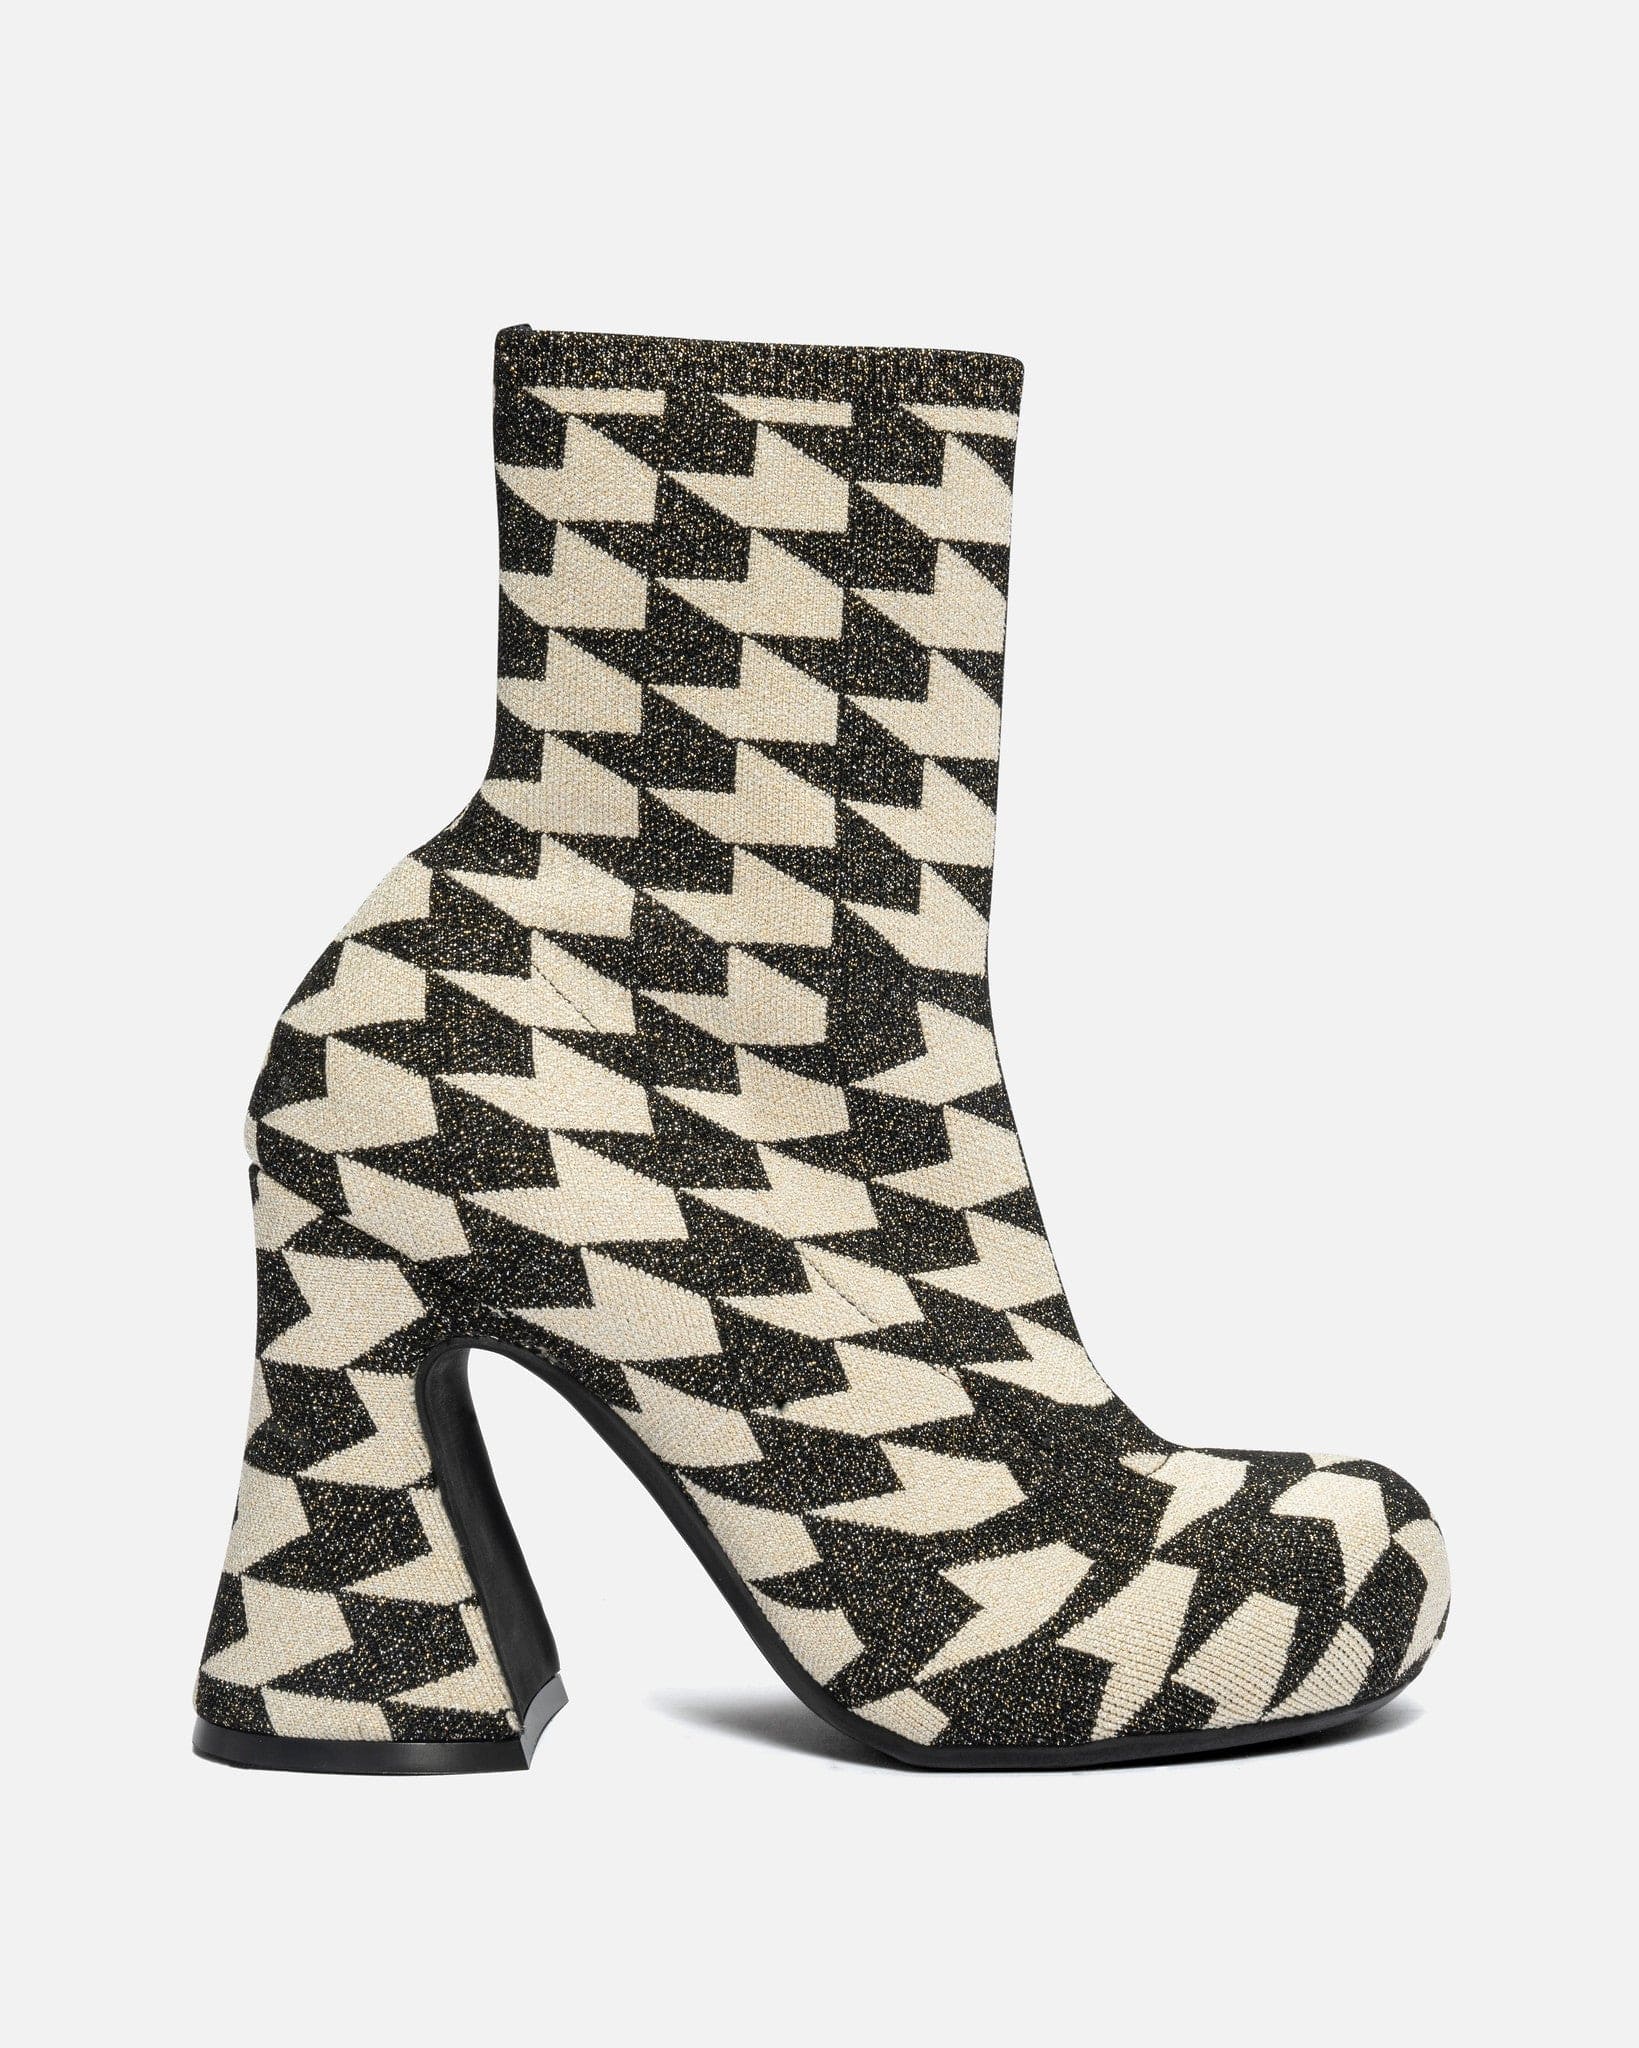 Marni Women Boots Jacquard Lurex Ankle Boots in Black/Cream